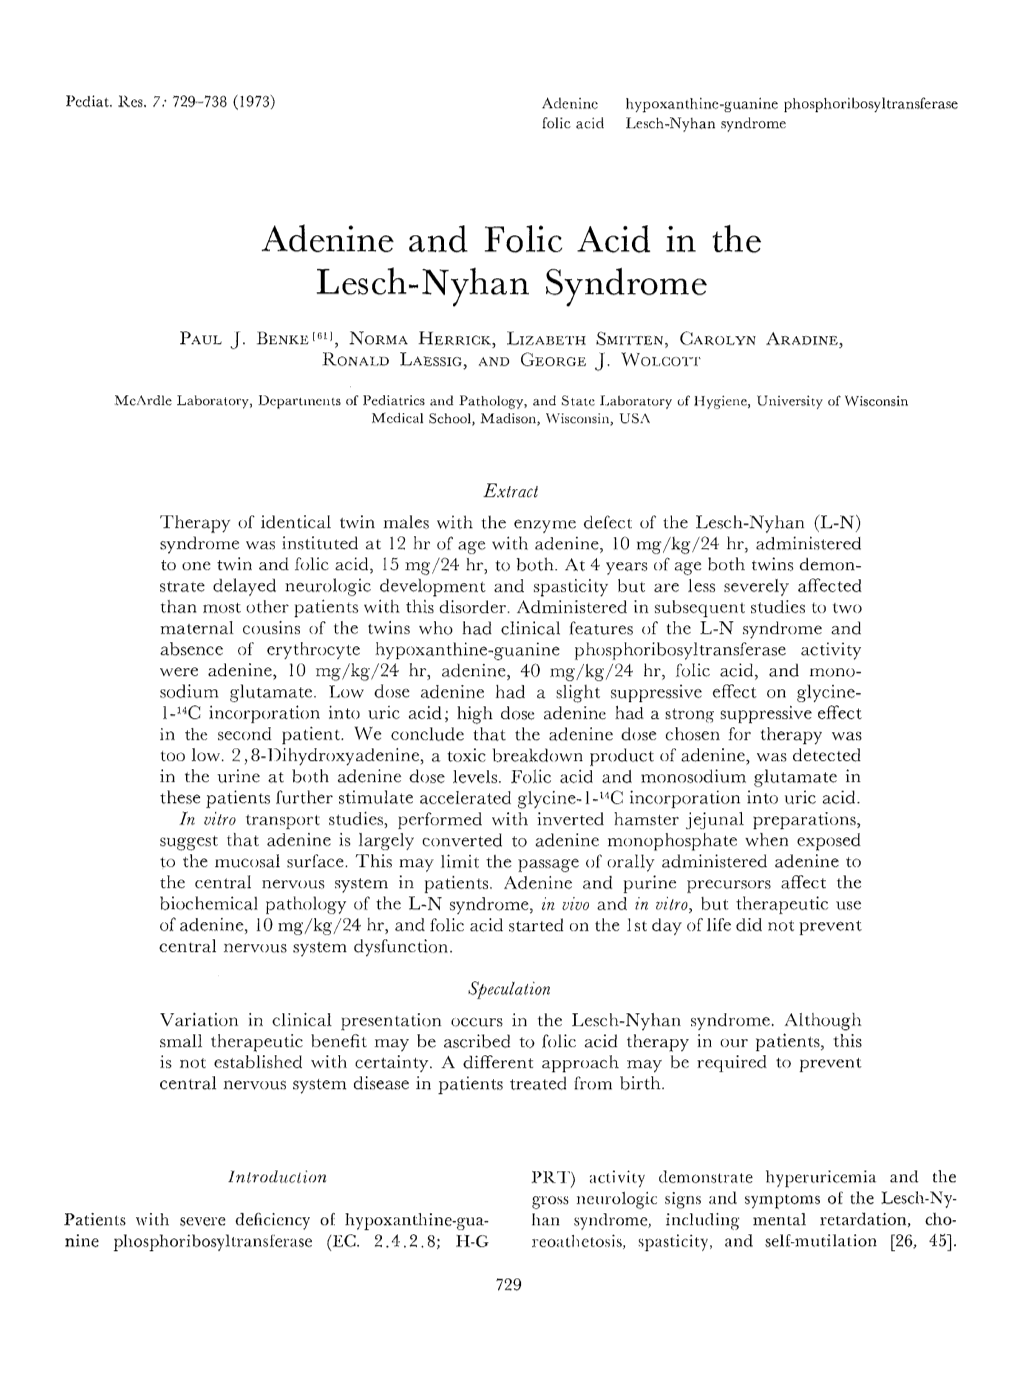 Adenine and Folic Acid in the Lesch-Nyhan Syndrome